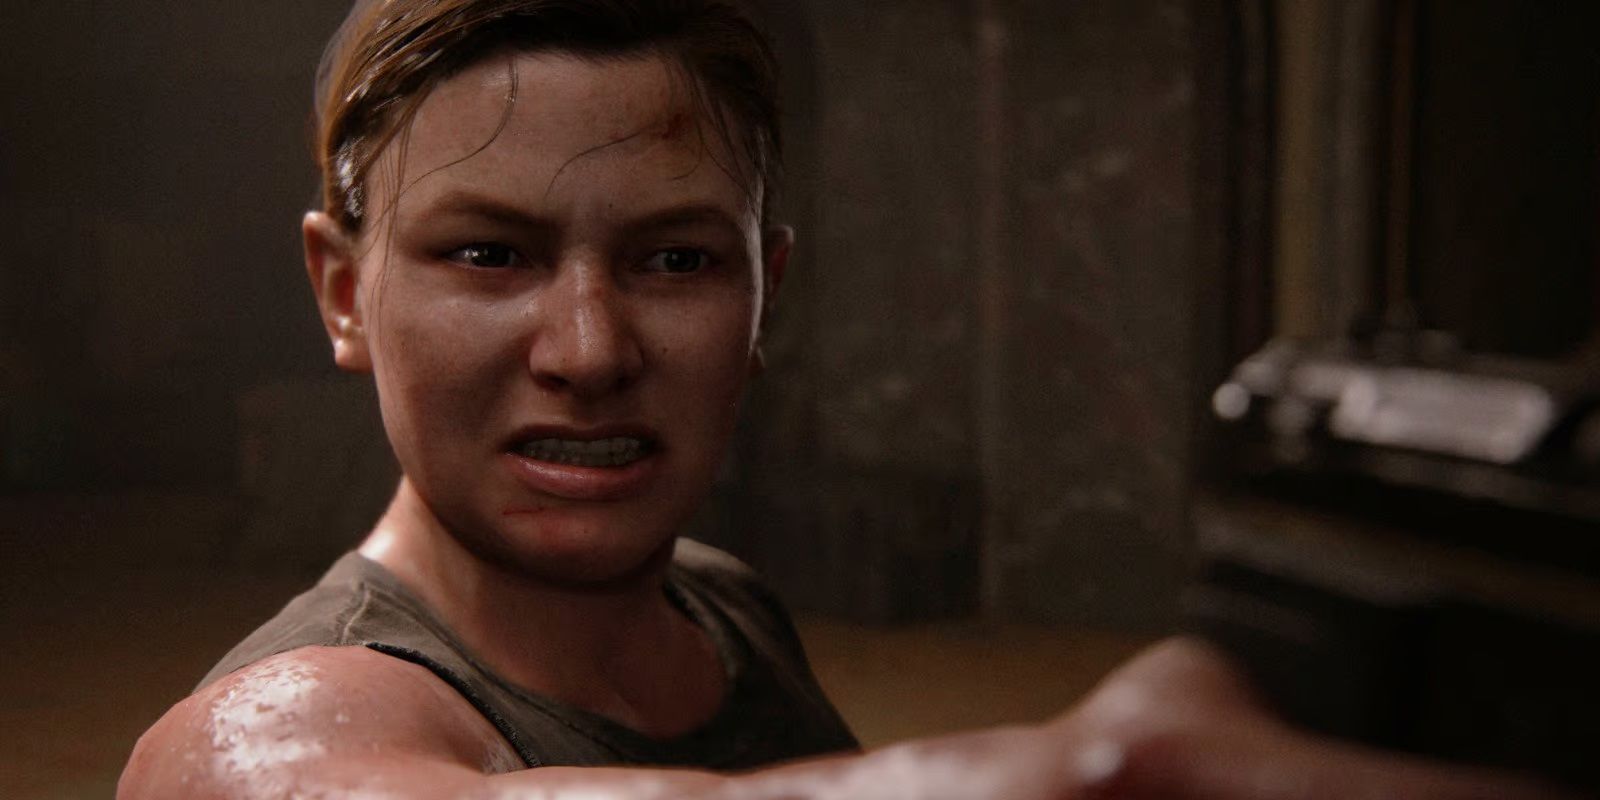 Abby is holding a gun in the theater in The Last of Us Part II